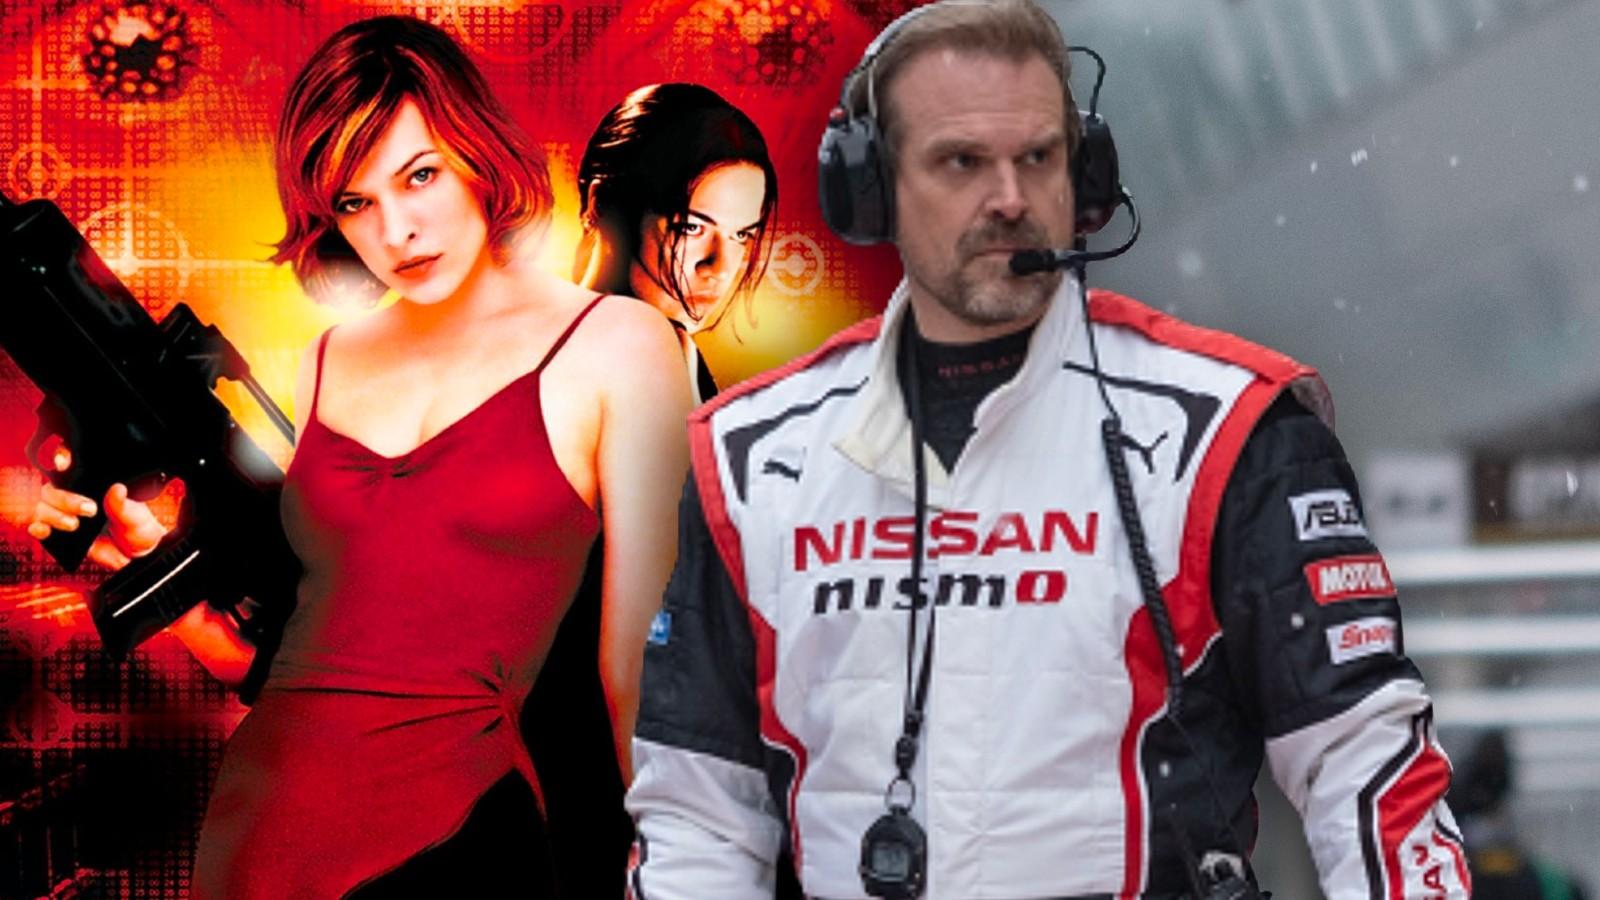 The poster for Resident Evil and David Harbour in the Gran Turismo movie